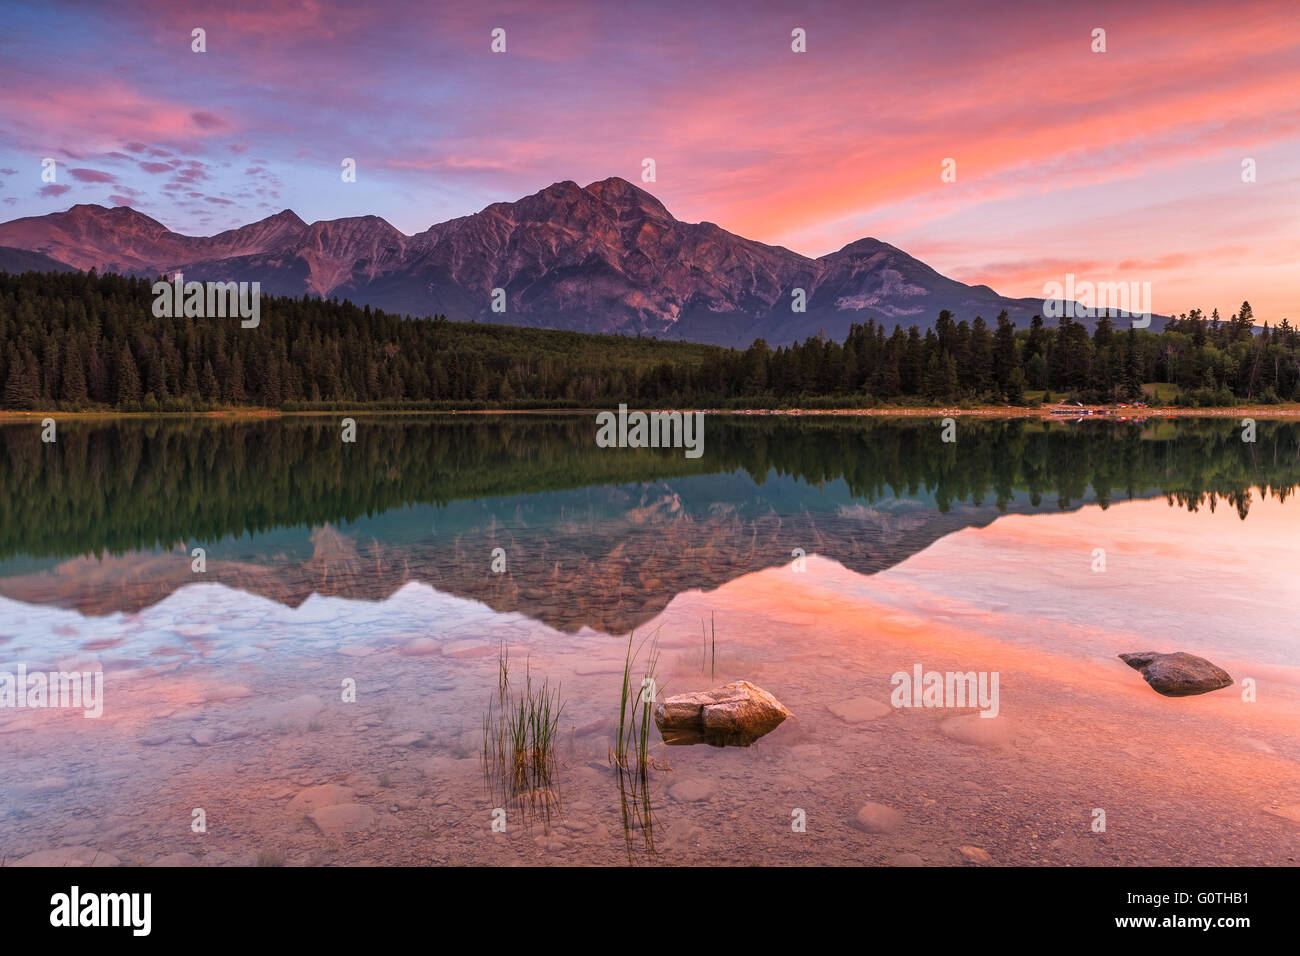 Patricia Lake by sunrise, with Pyramid Mountain in the background, Jasper National Park, Alberta, Canada, America. Stock Photo